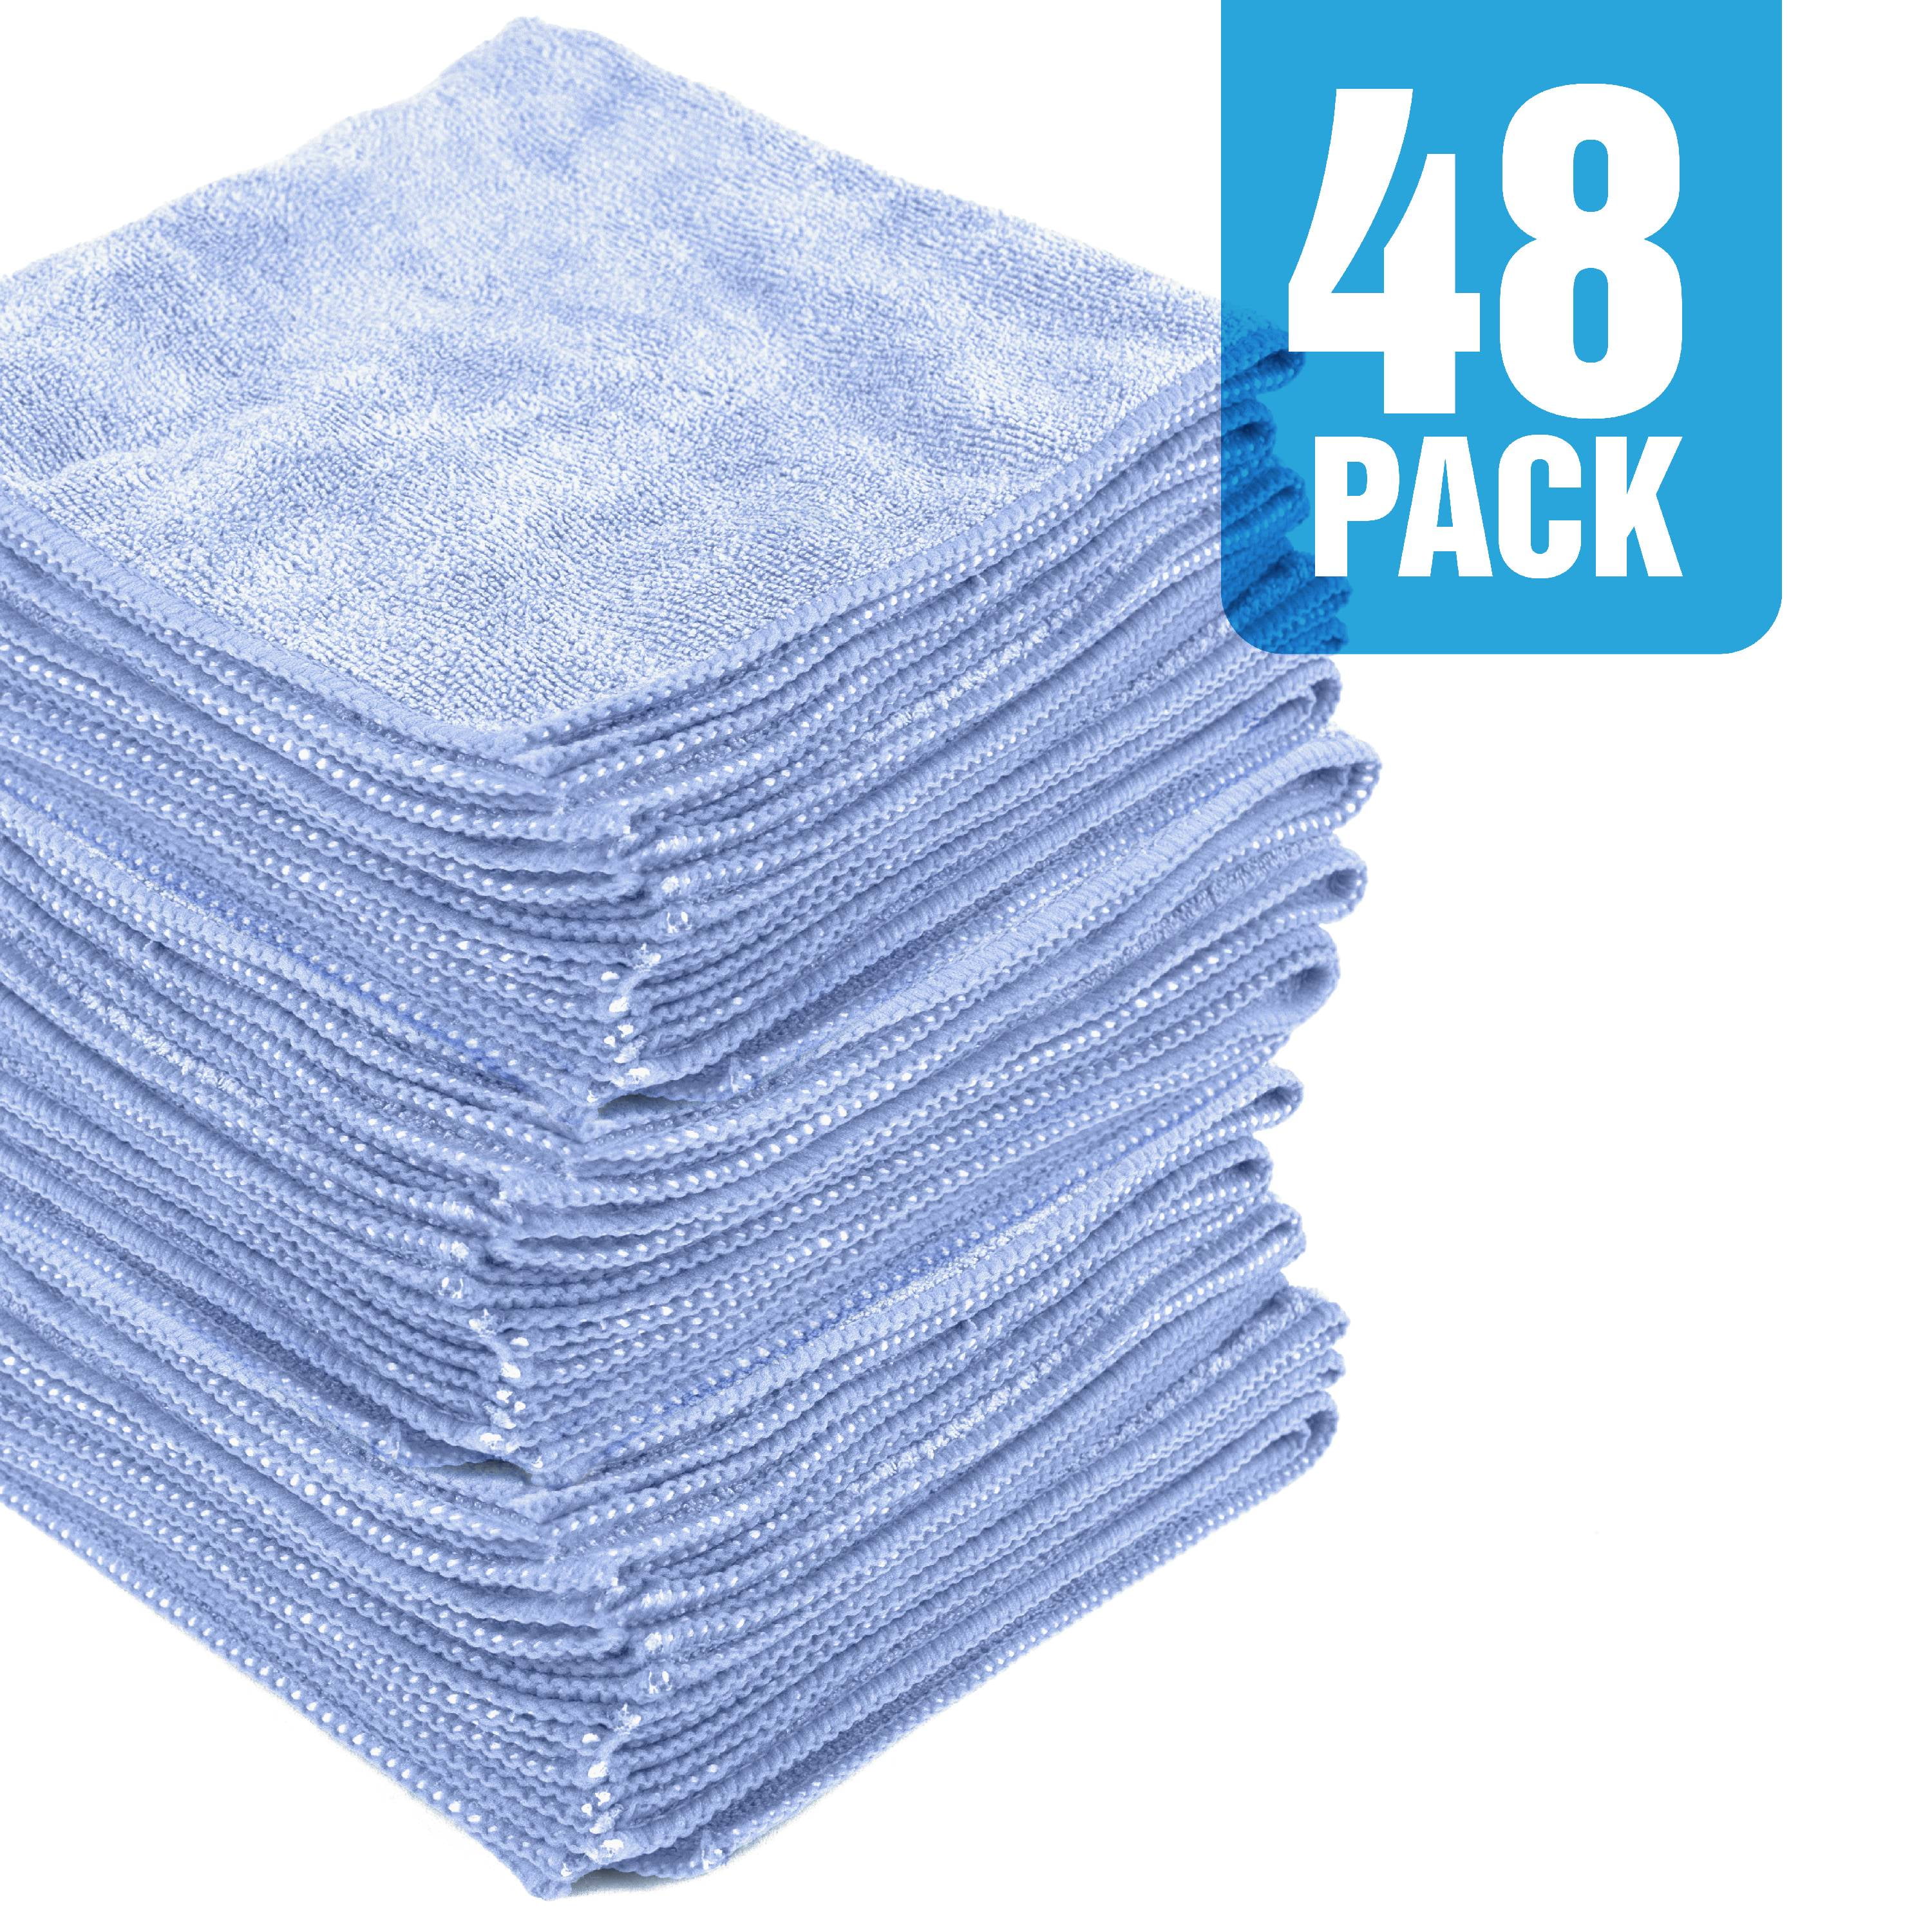 MW Pro Microfiber Cleaning Cloths (12 Pack) | Size 16 x 16| All Purpose  Microfiber Towels - Clean, Dust, Polish, Scrub, Absorbent (Gray)